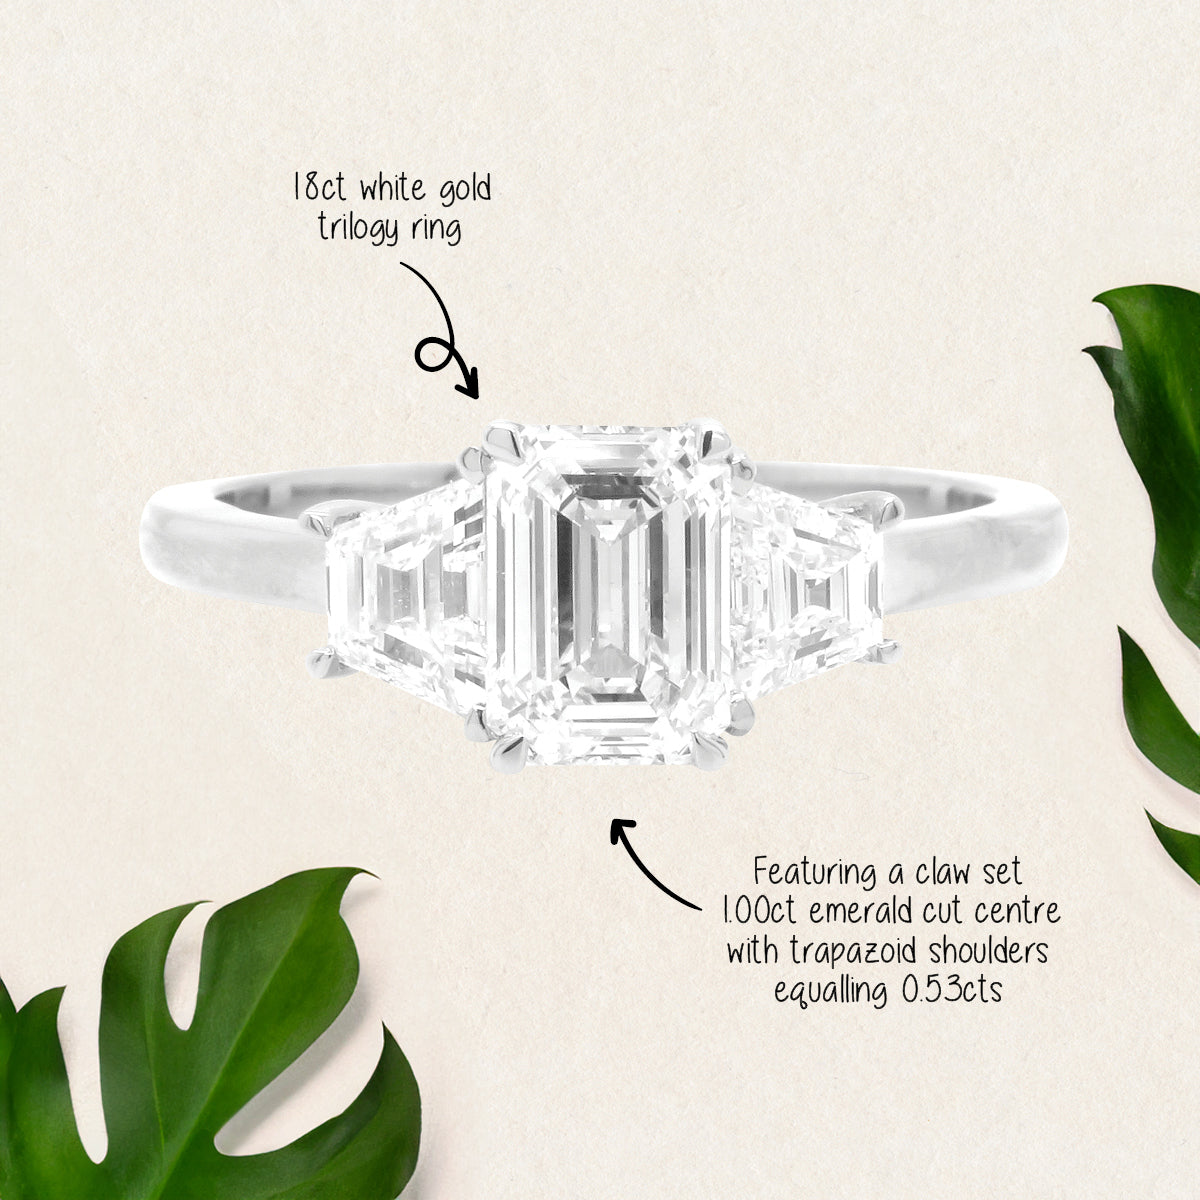 Featuring 0.53ct emerald cut lab grown diamond trilogy ring by greenhouse diamonds